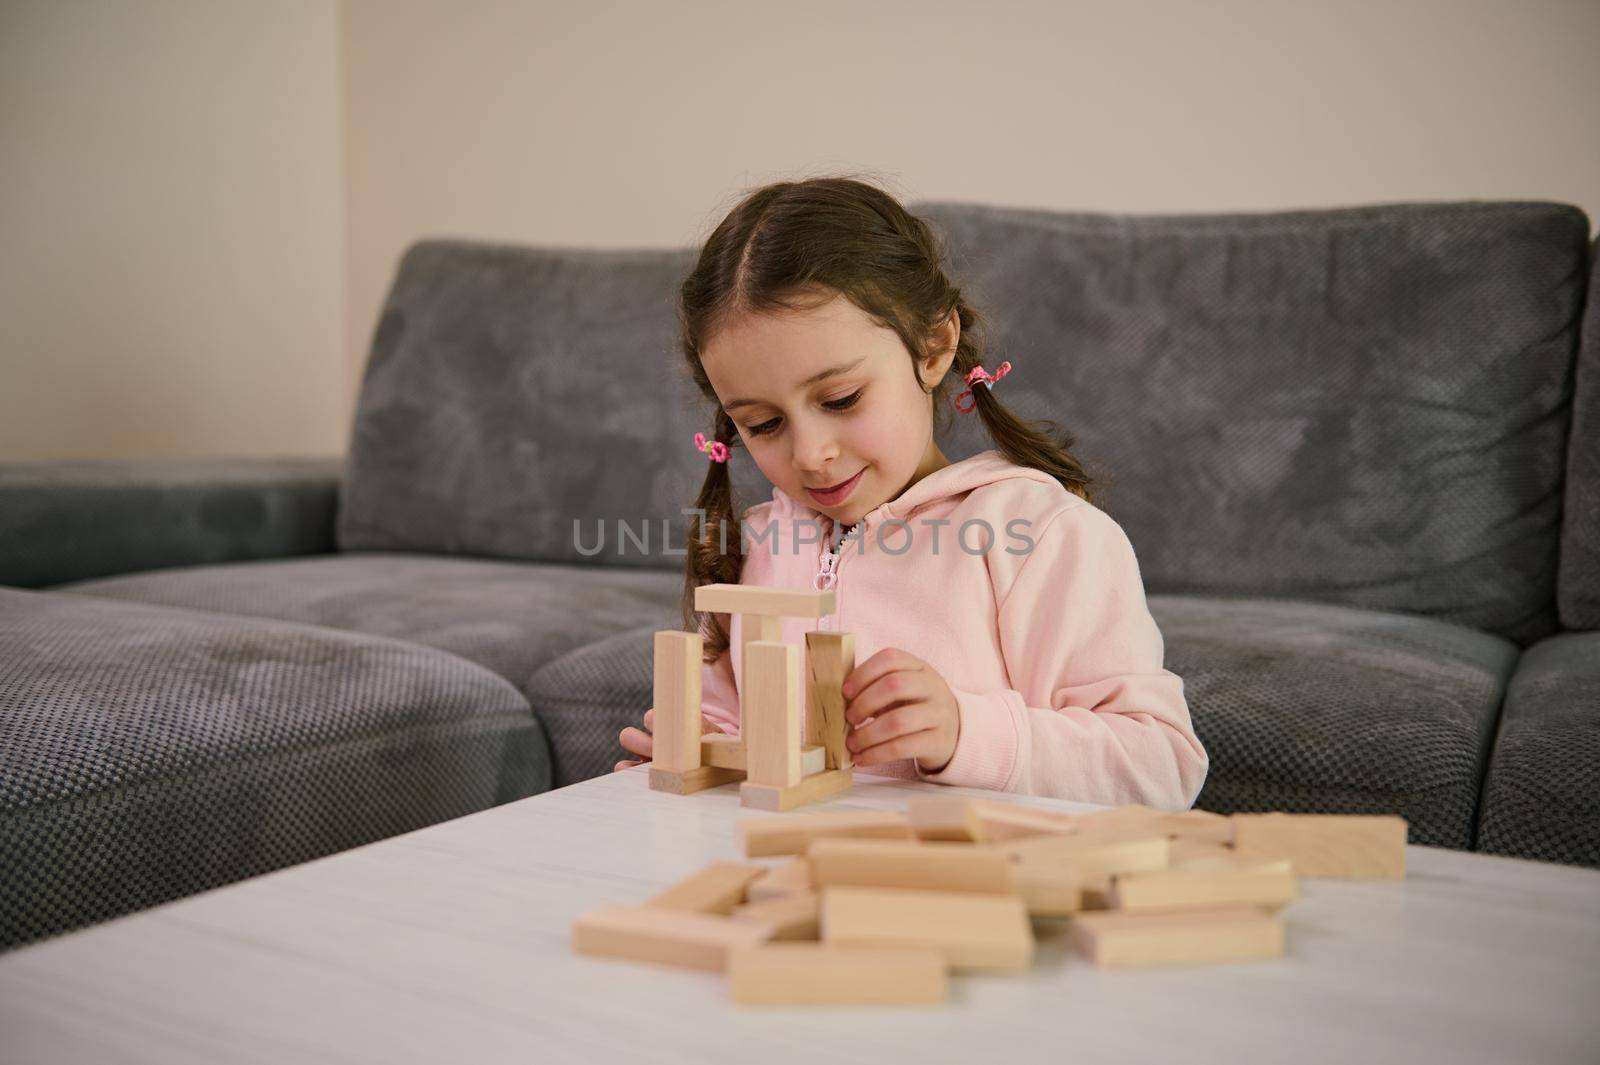 Cheerful creative beautiful European 5 y.o. little girl with two pigtails in pink sweatshirt playing educational developmental board game, she's concentrated on building wooden structures with blocks